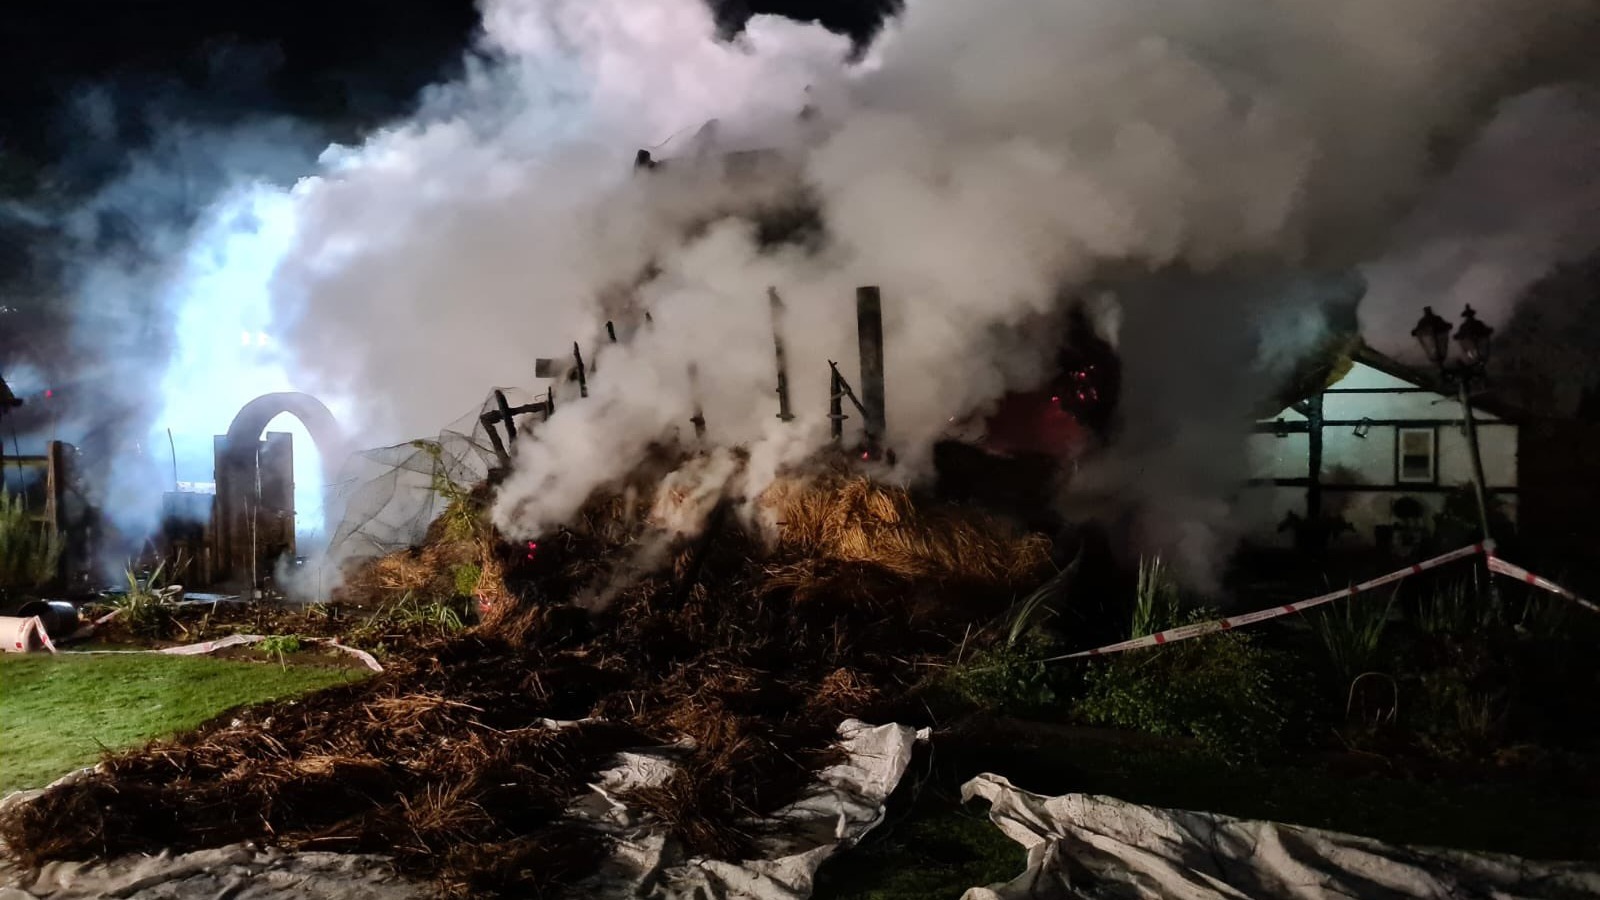 Firefighters tackle thatched roof blaze in Clanfield